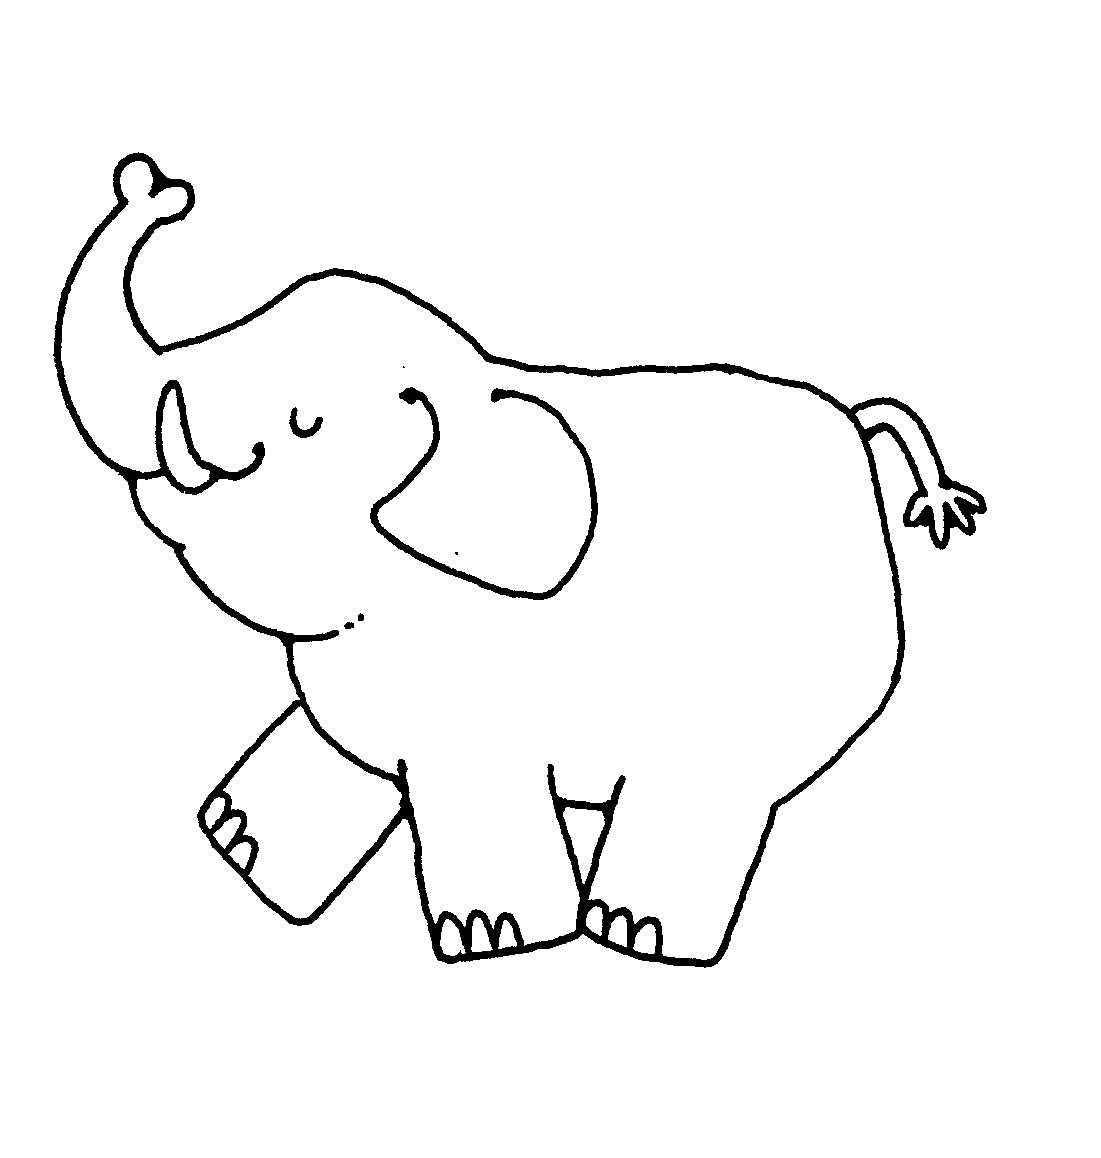 Free Elephant Images Black And White, Download Free Clip Art